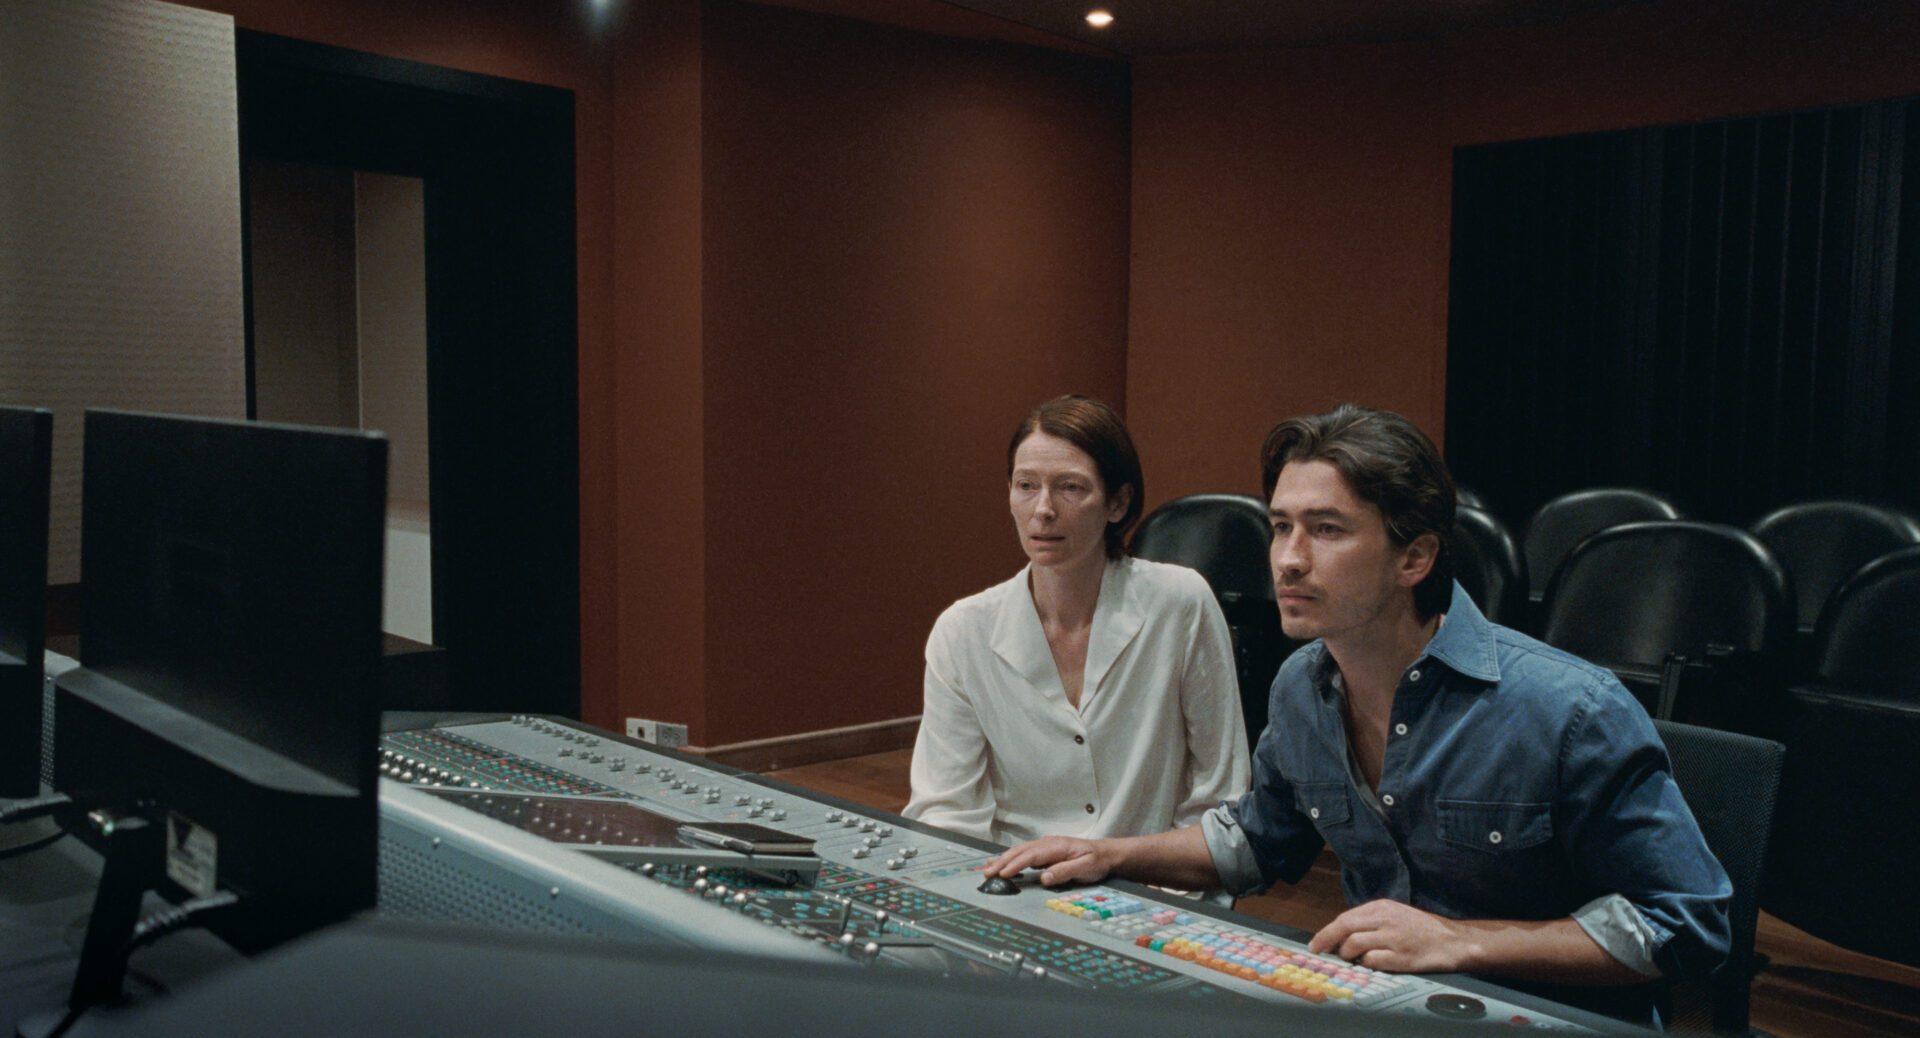 Jessica (Tilda Swinton) works with an audio engineer to find the source of the annoying noise